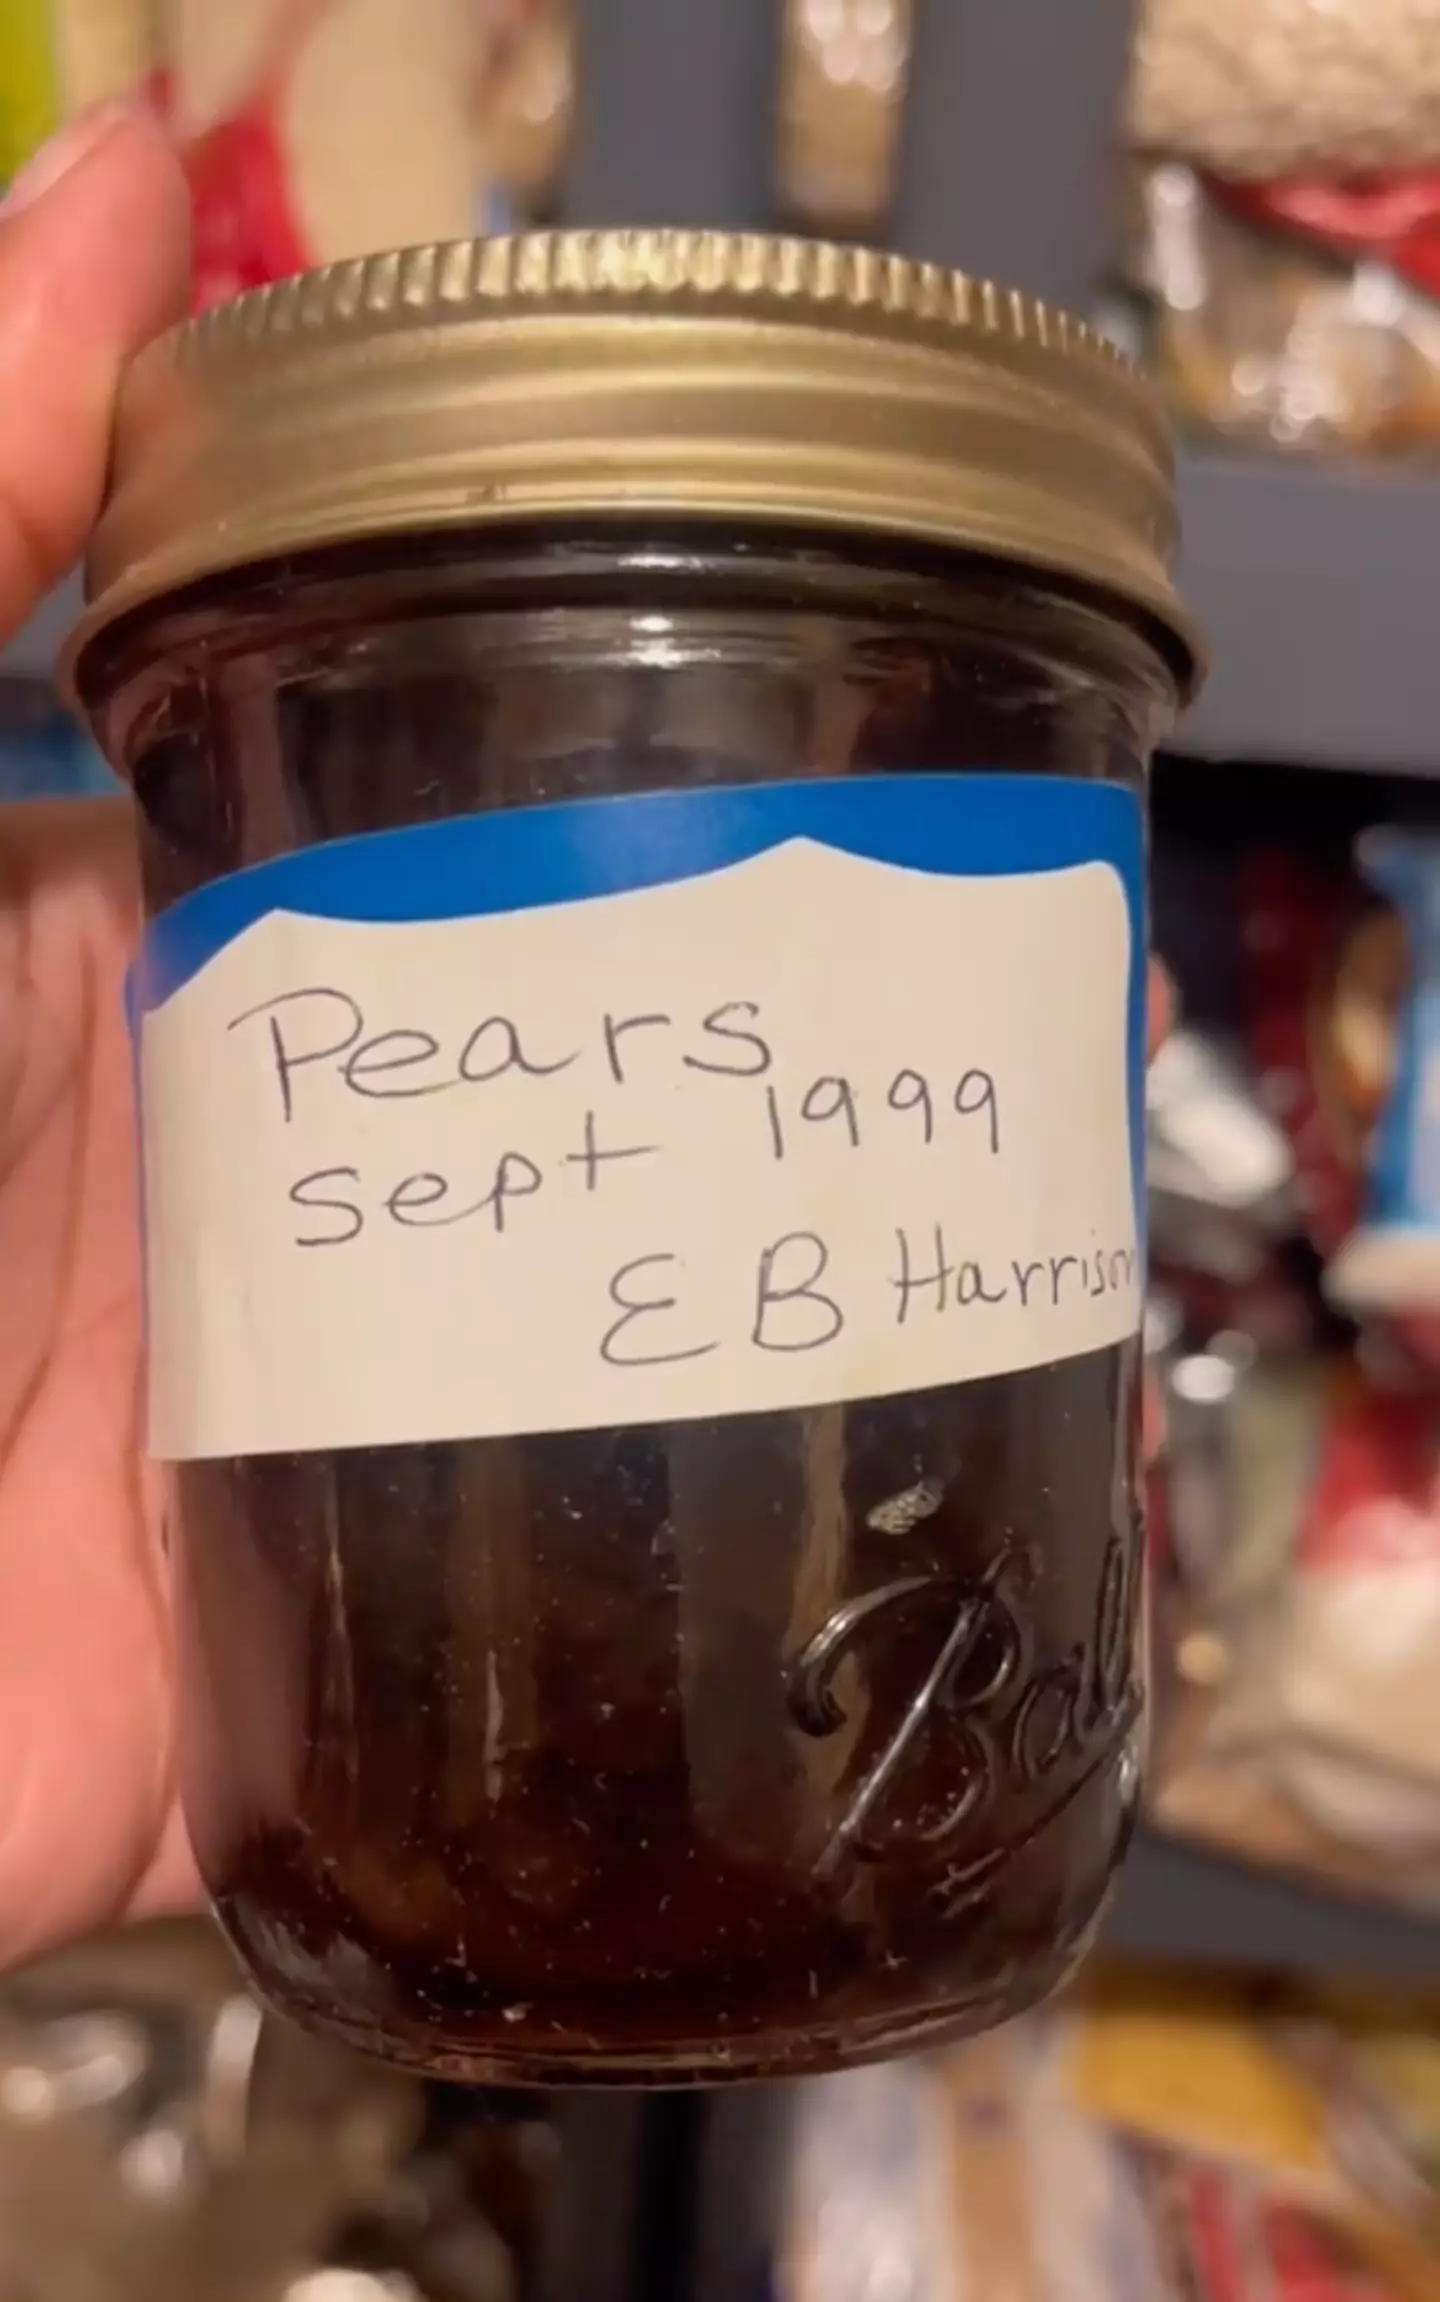 Please don't open those 24 year old pears.